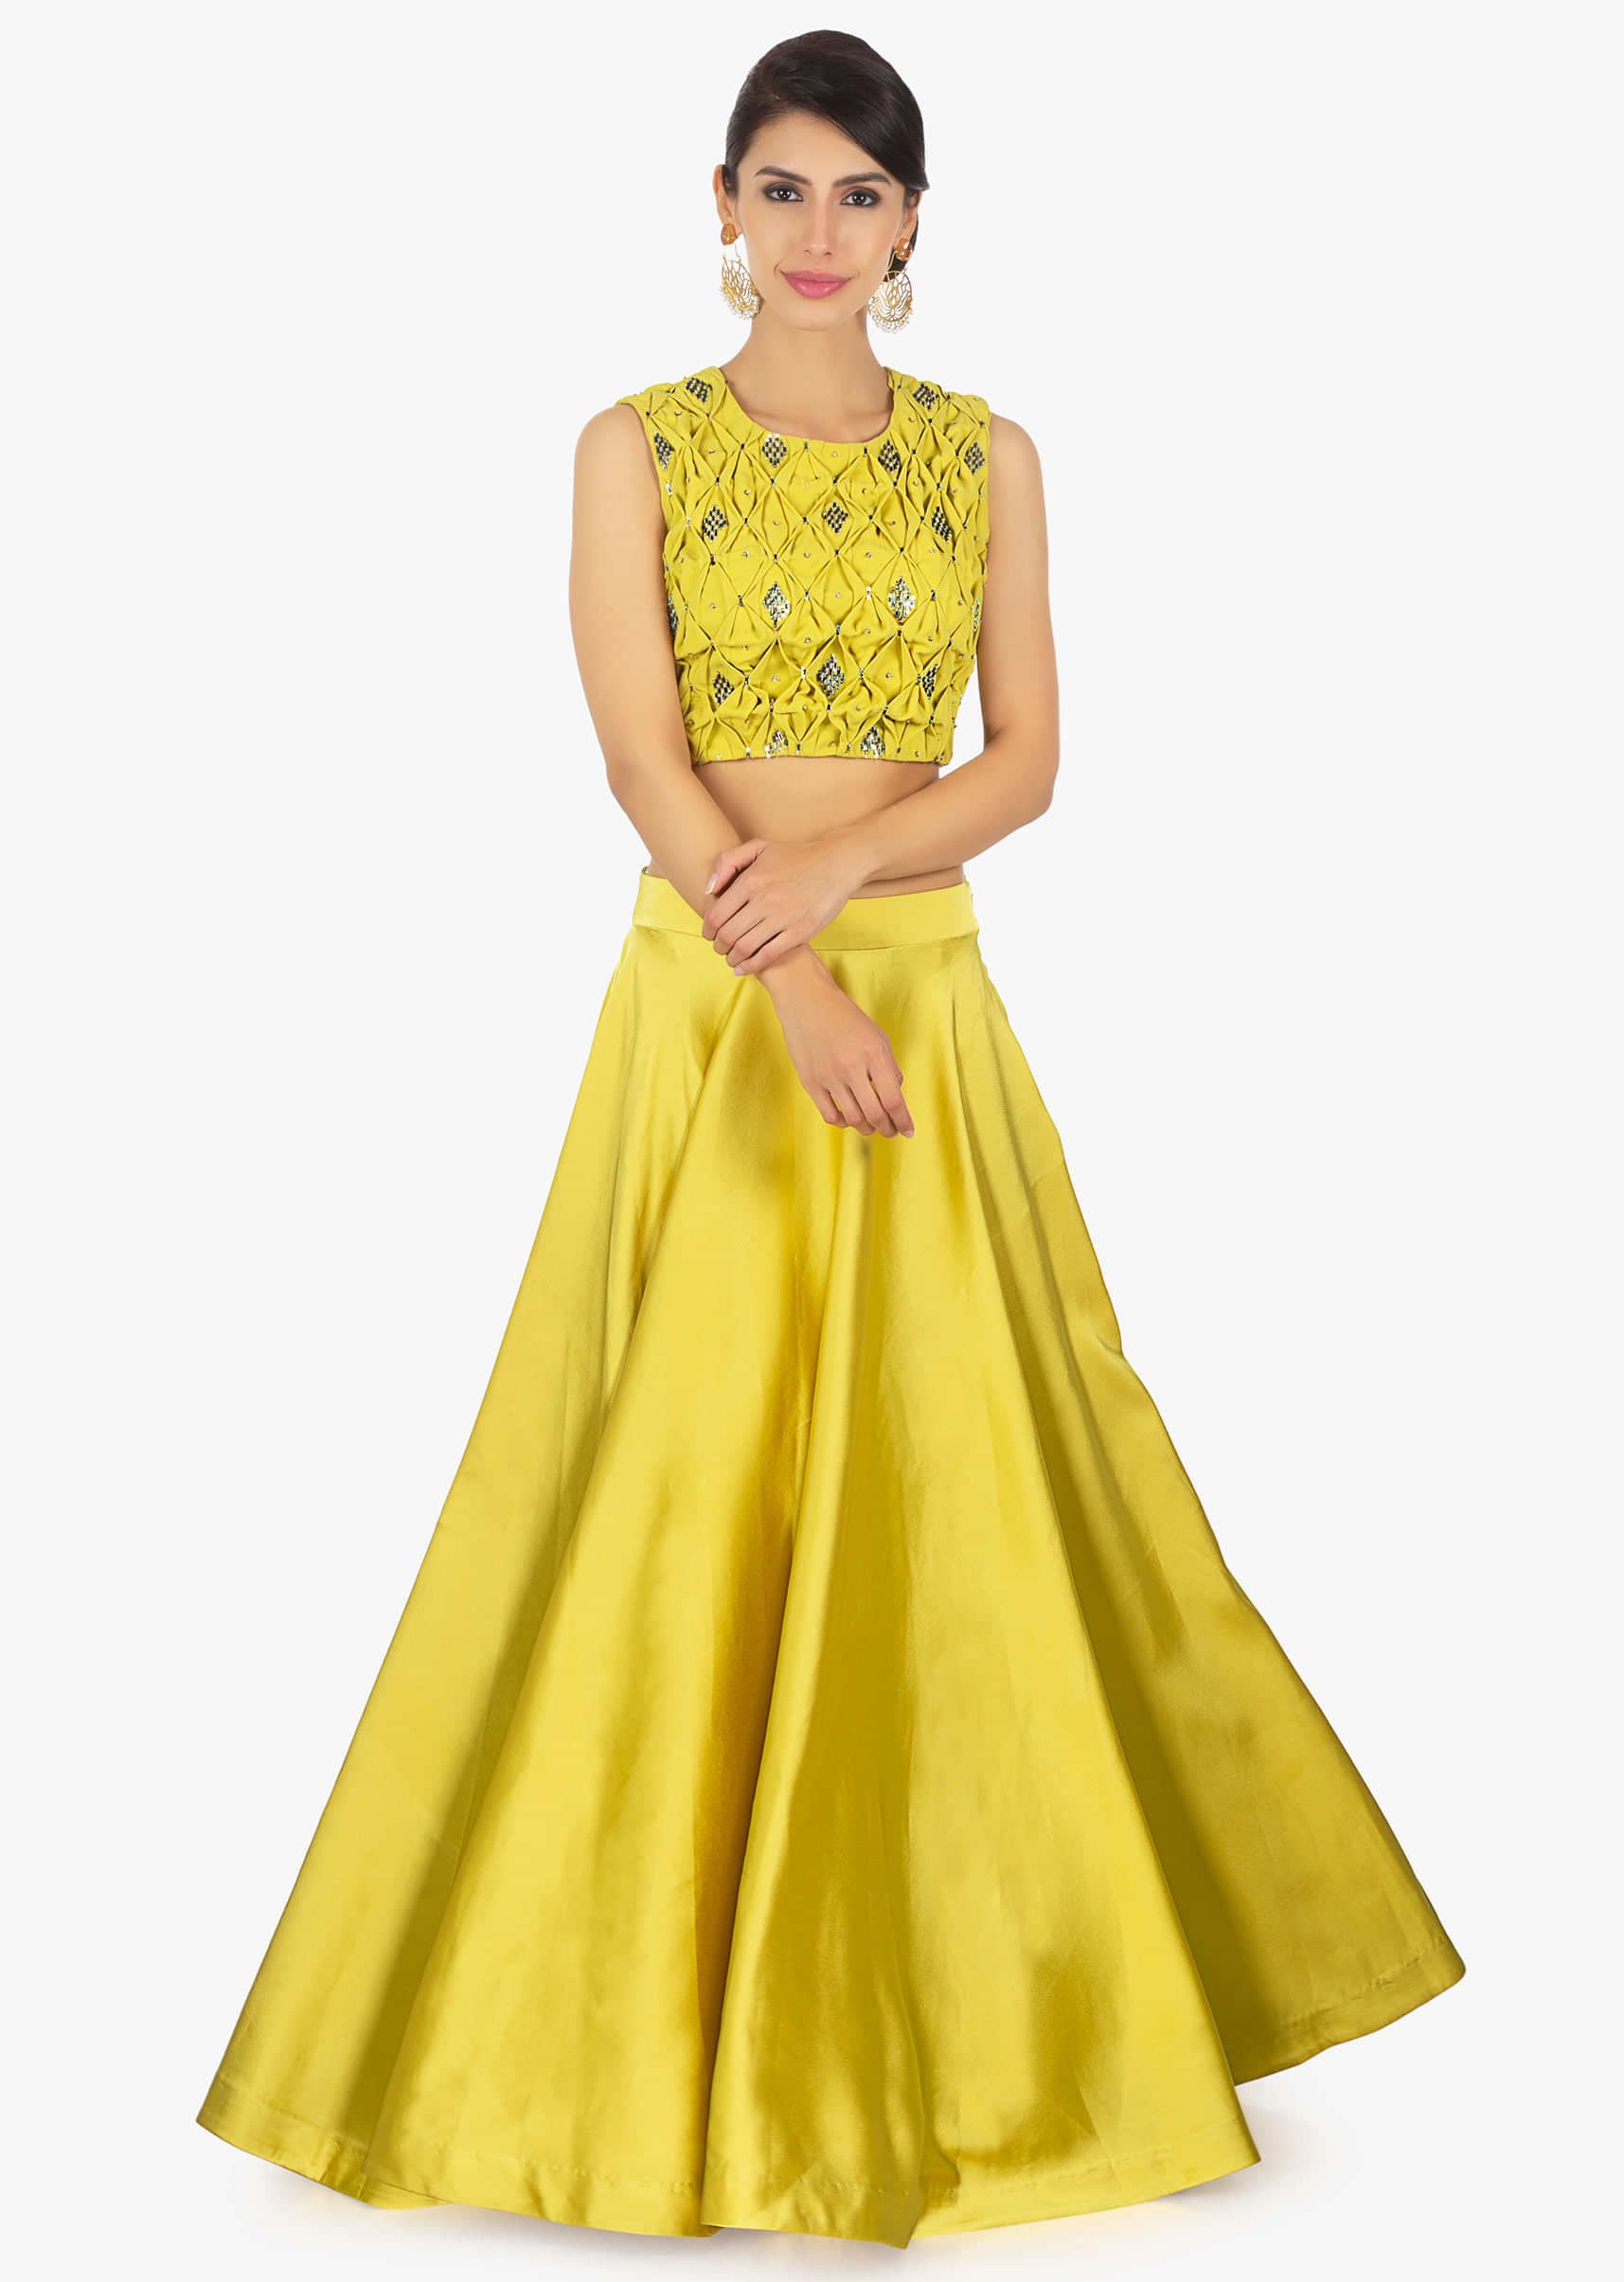 Tuscan yellow satin skirt paired with matching georgette smocked  blouse